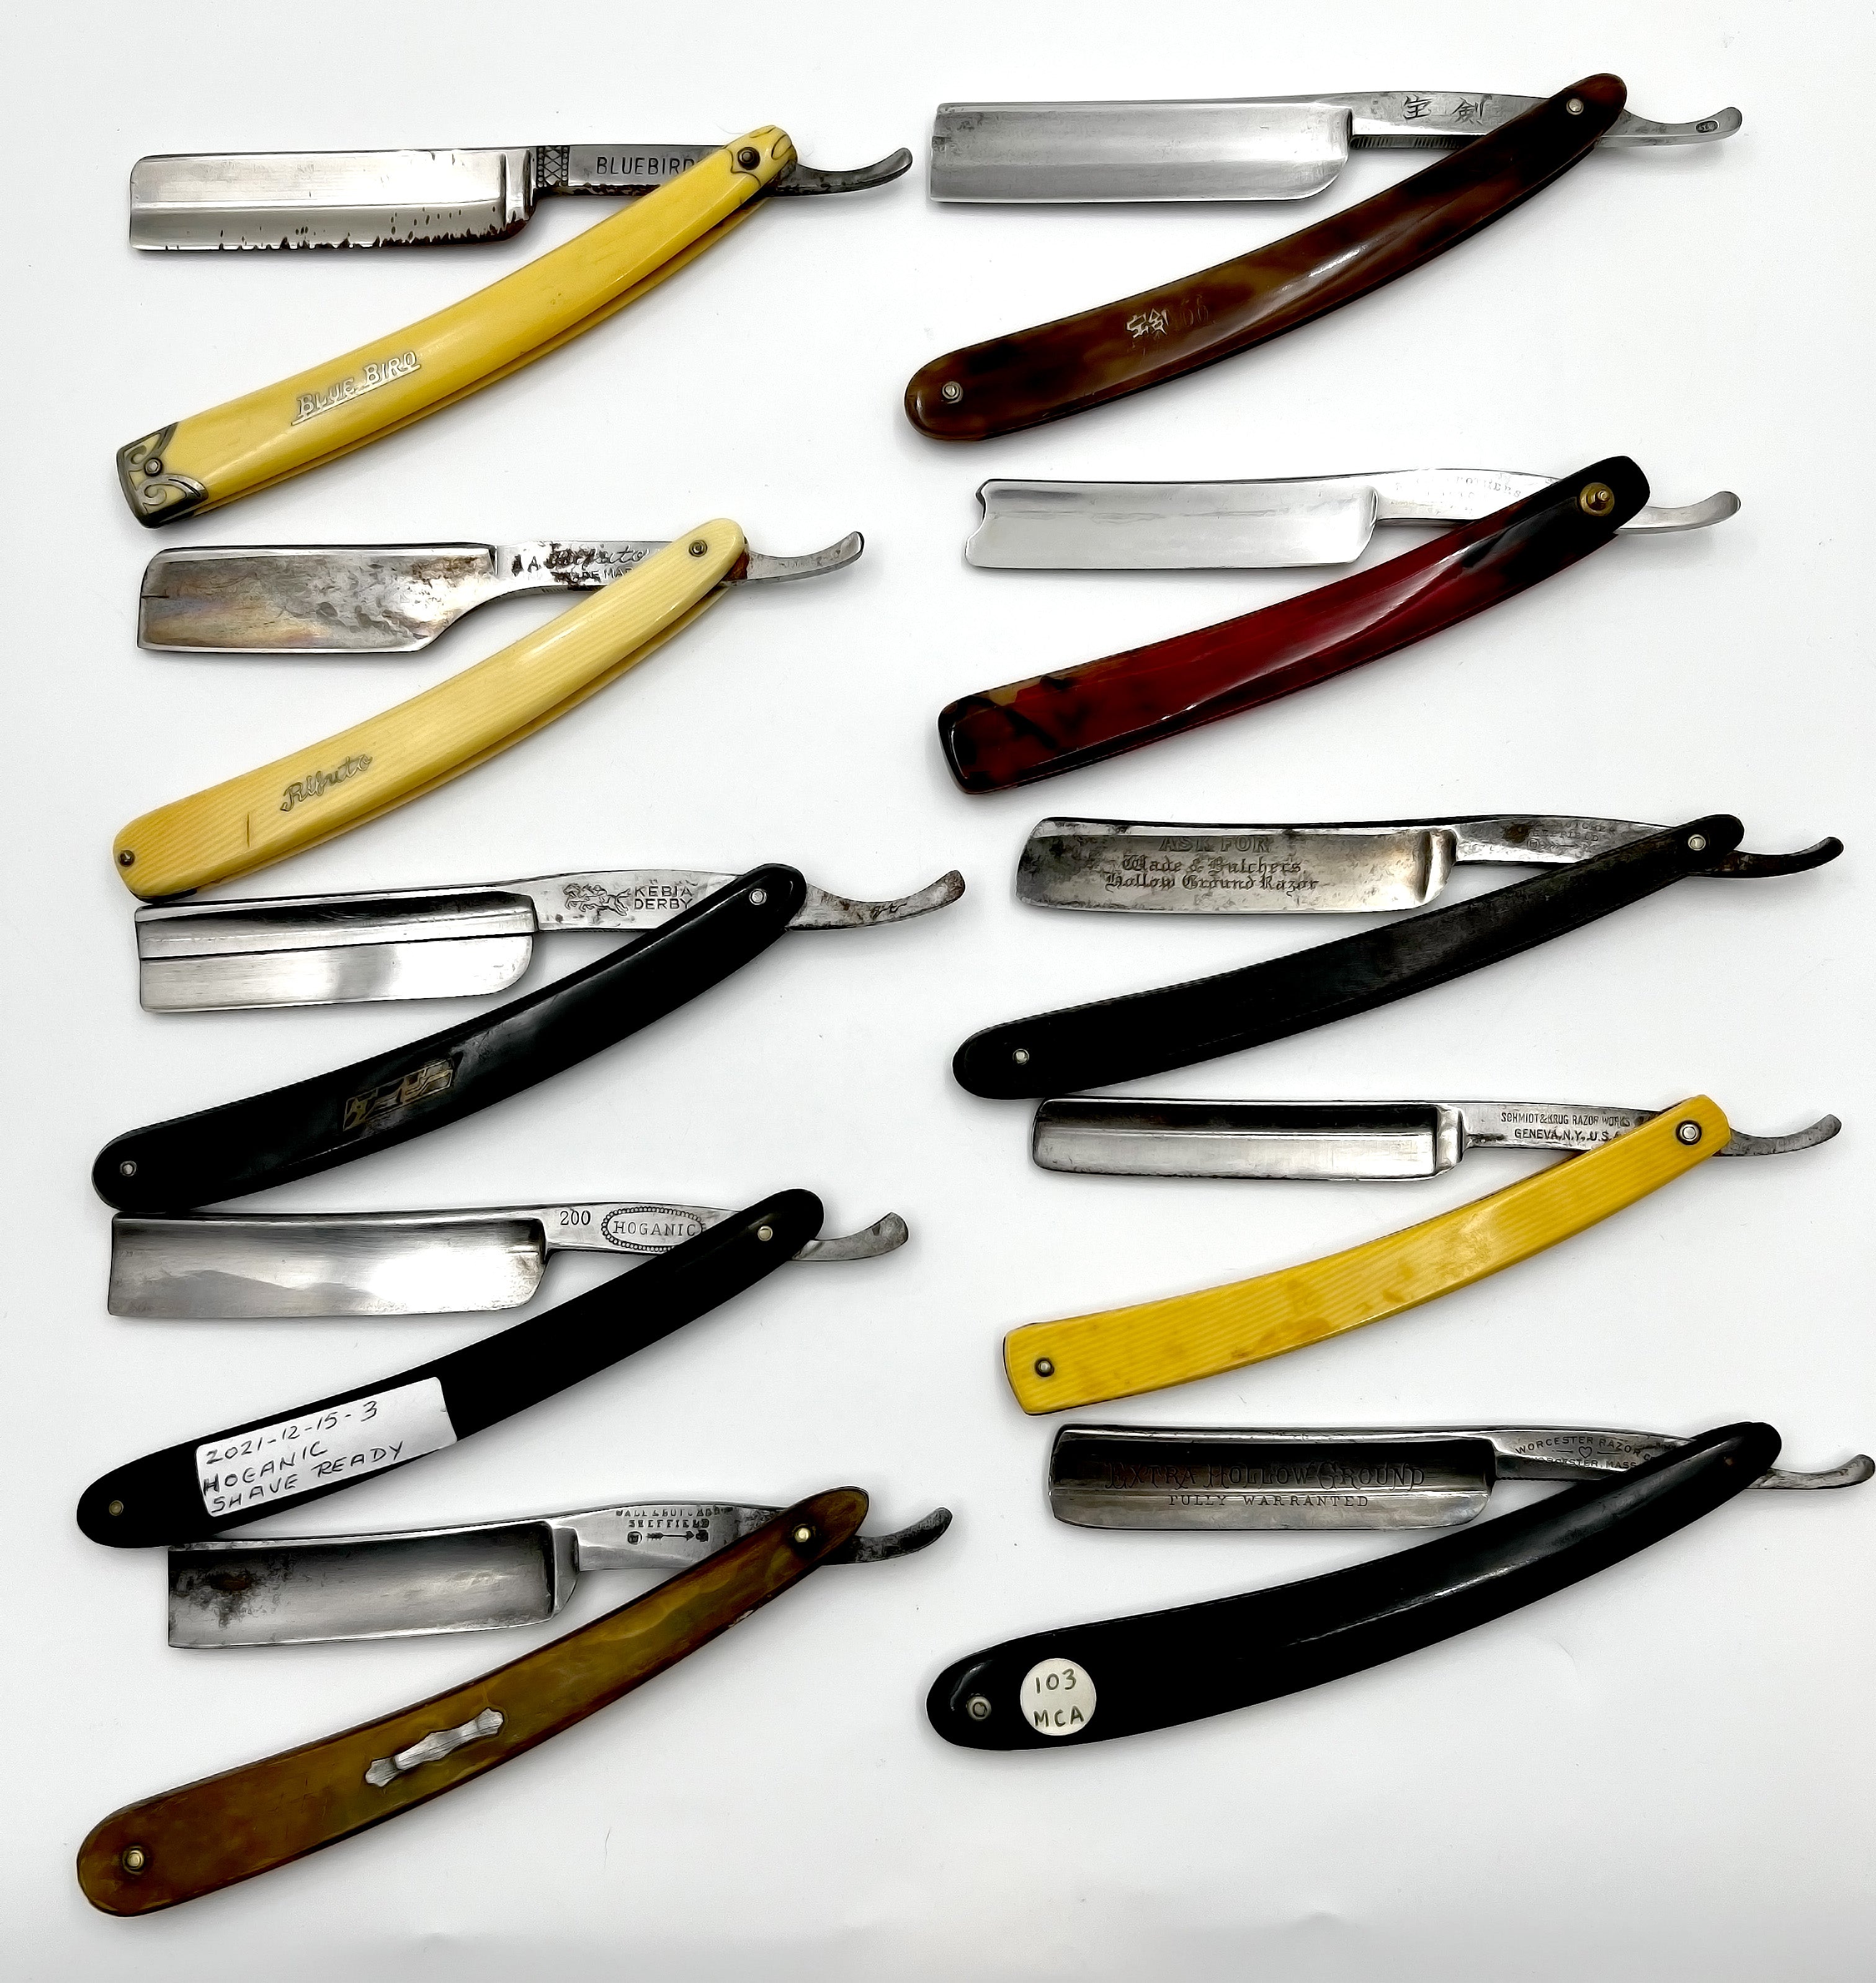 Vintage 10 Straight Razor Lot #35 - May Contain Sheffield, Solingen & USA makers, as pictured